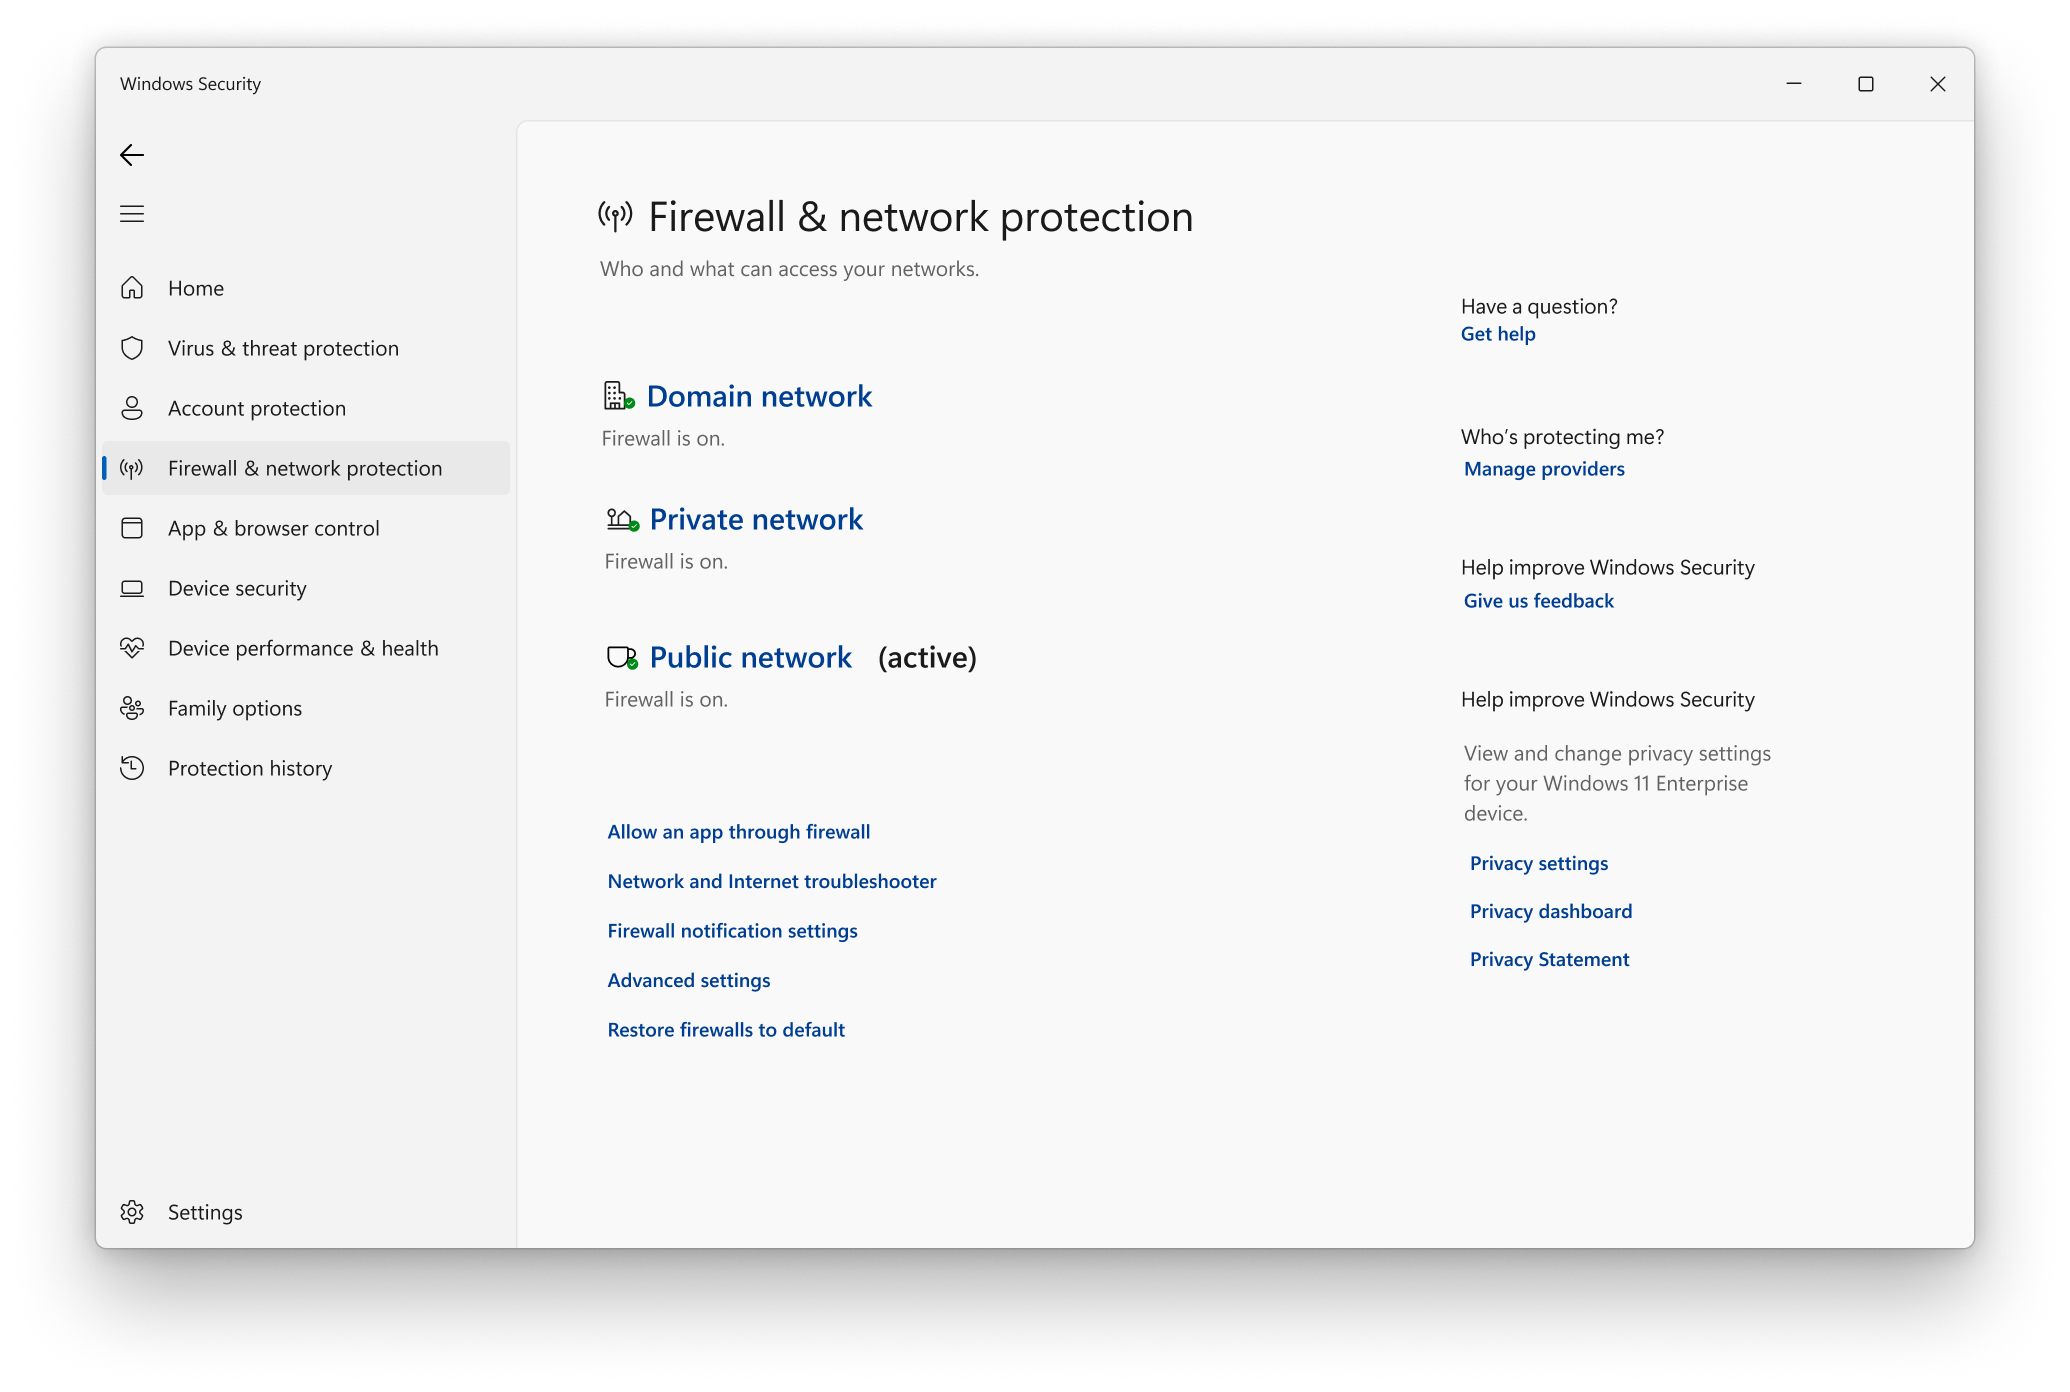 Security software and firewall settings interface